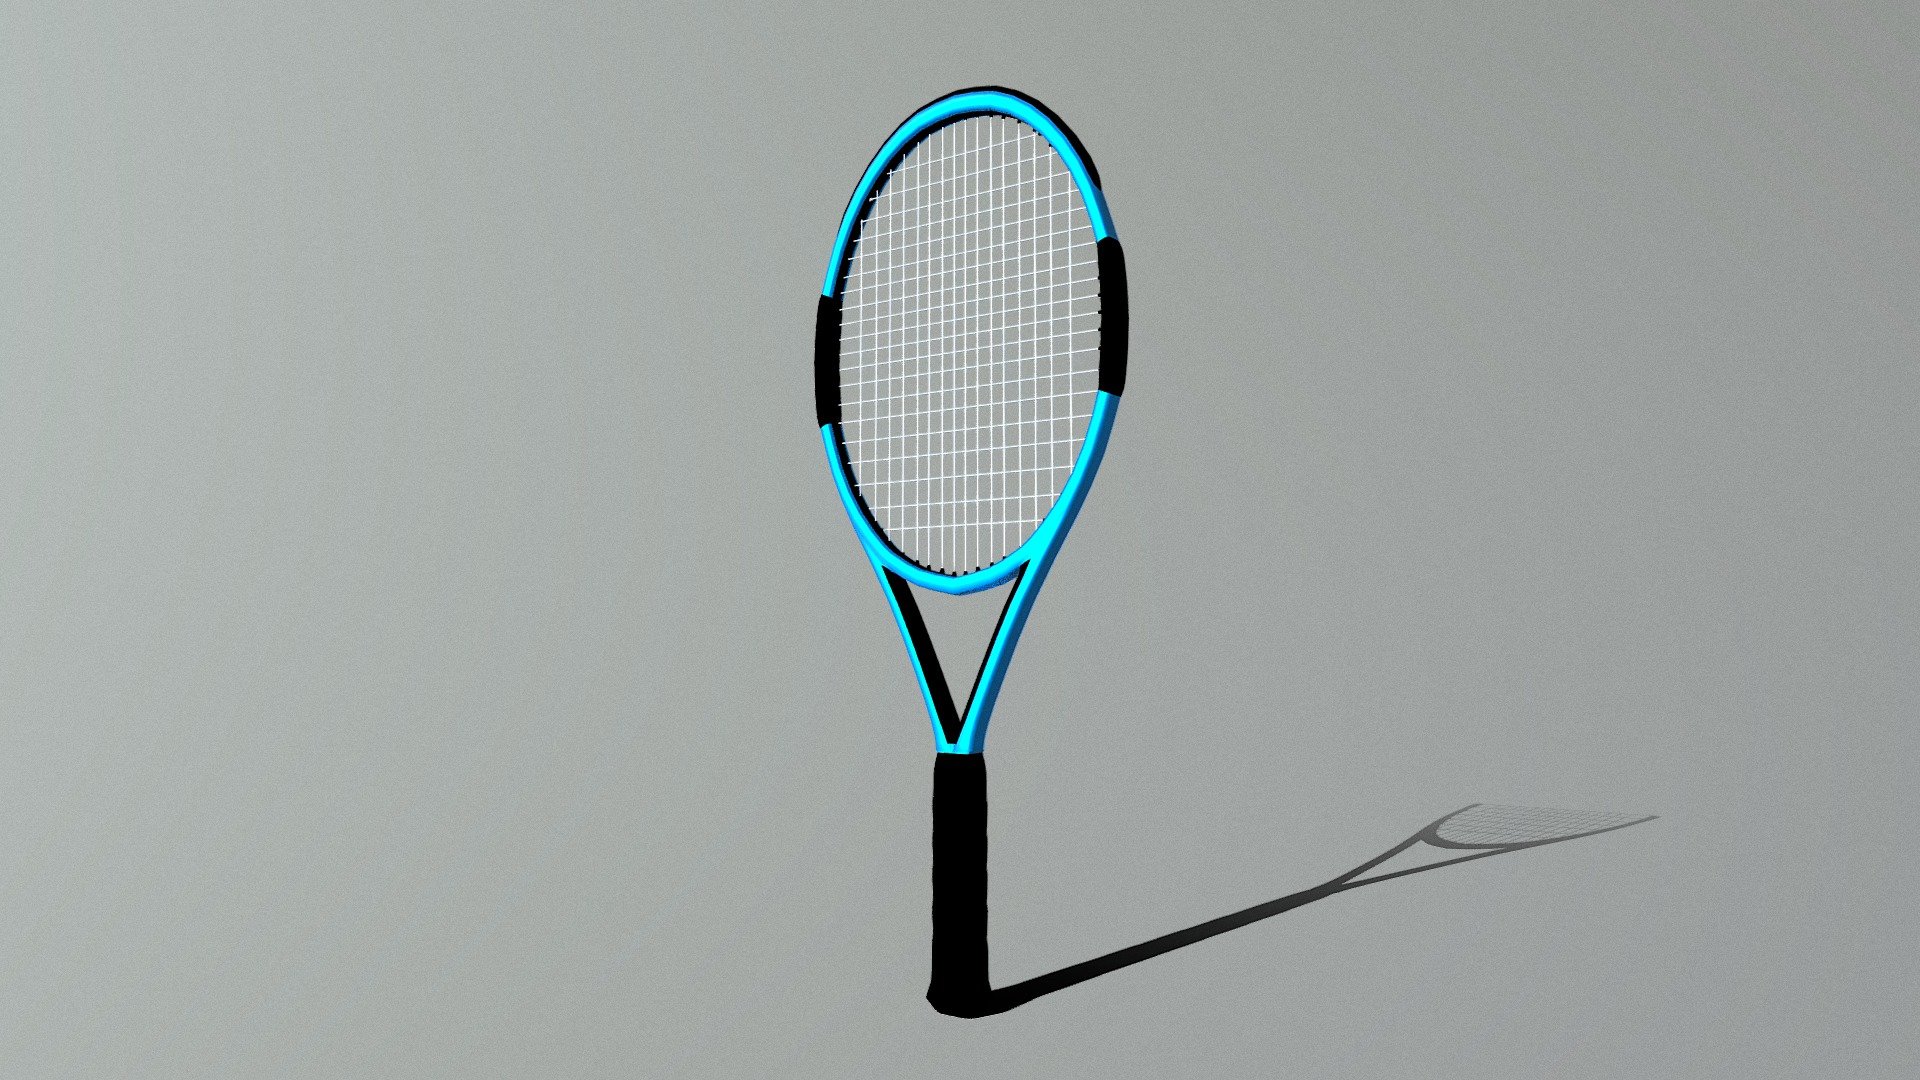 How to draw a tennis ball? - SketchUp - SketchUp Community